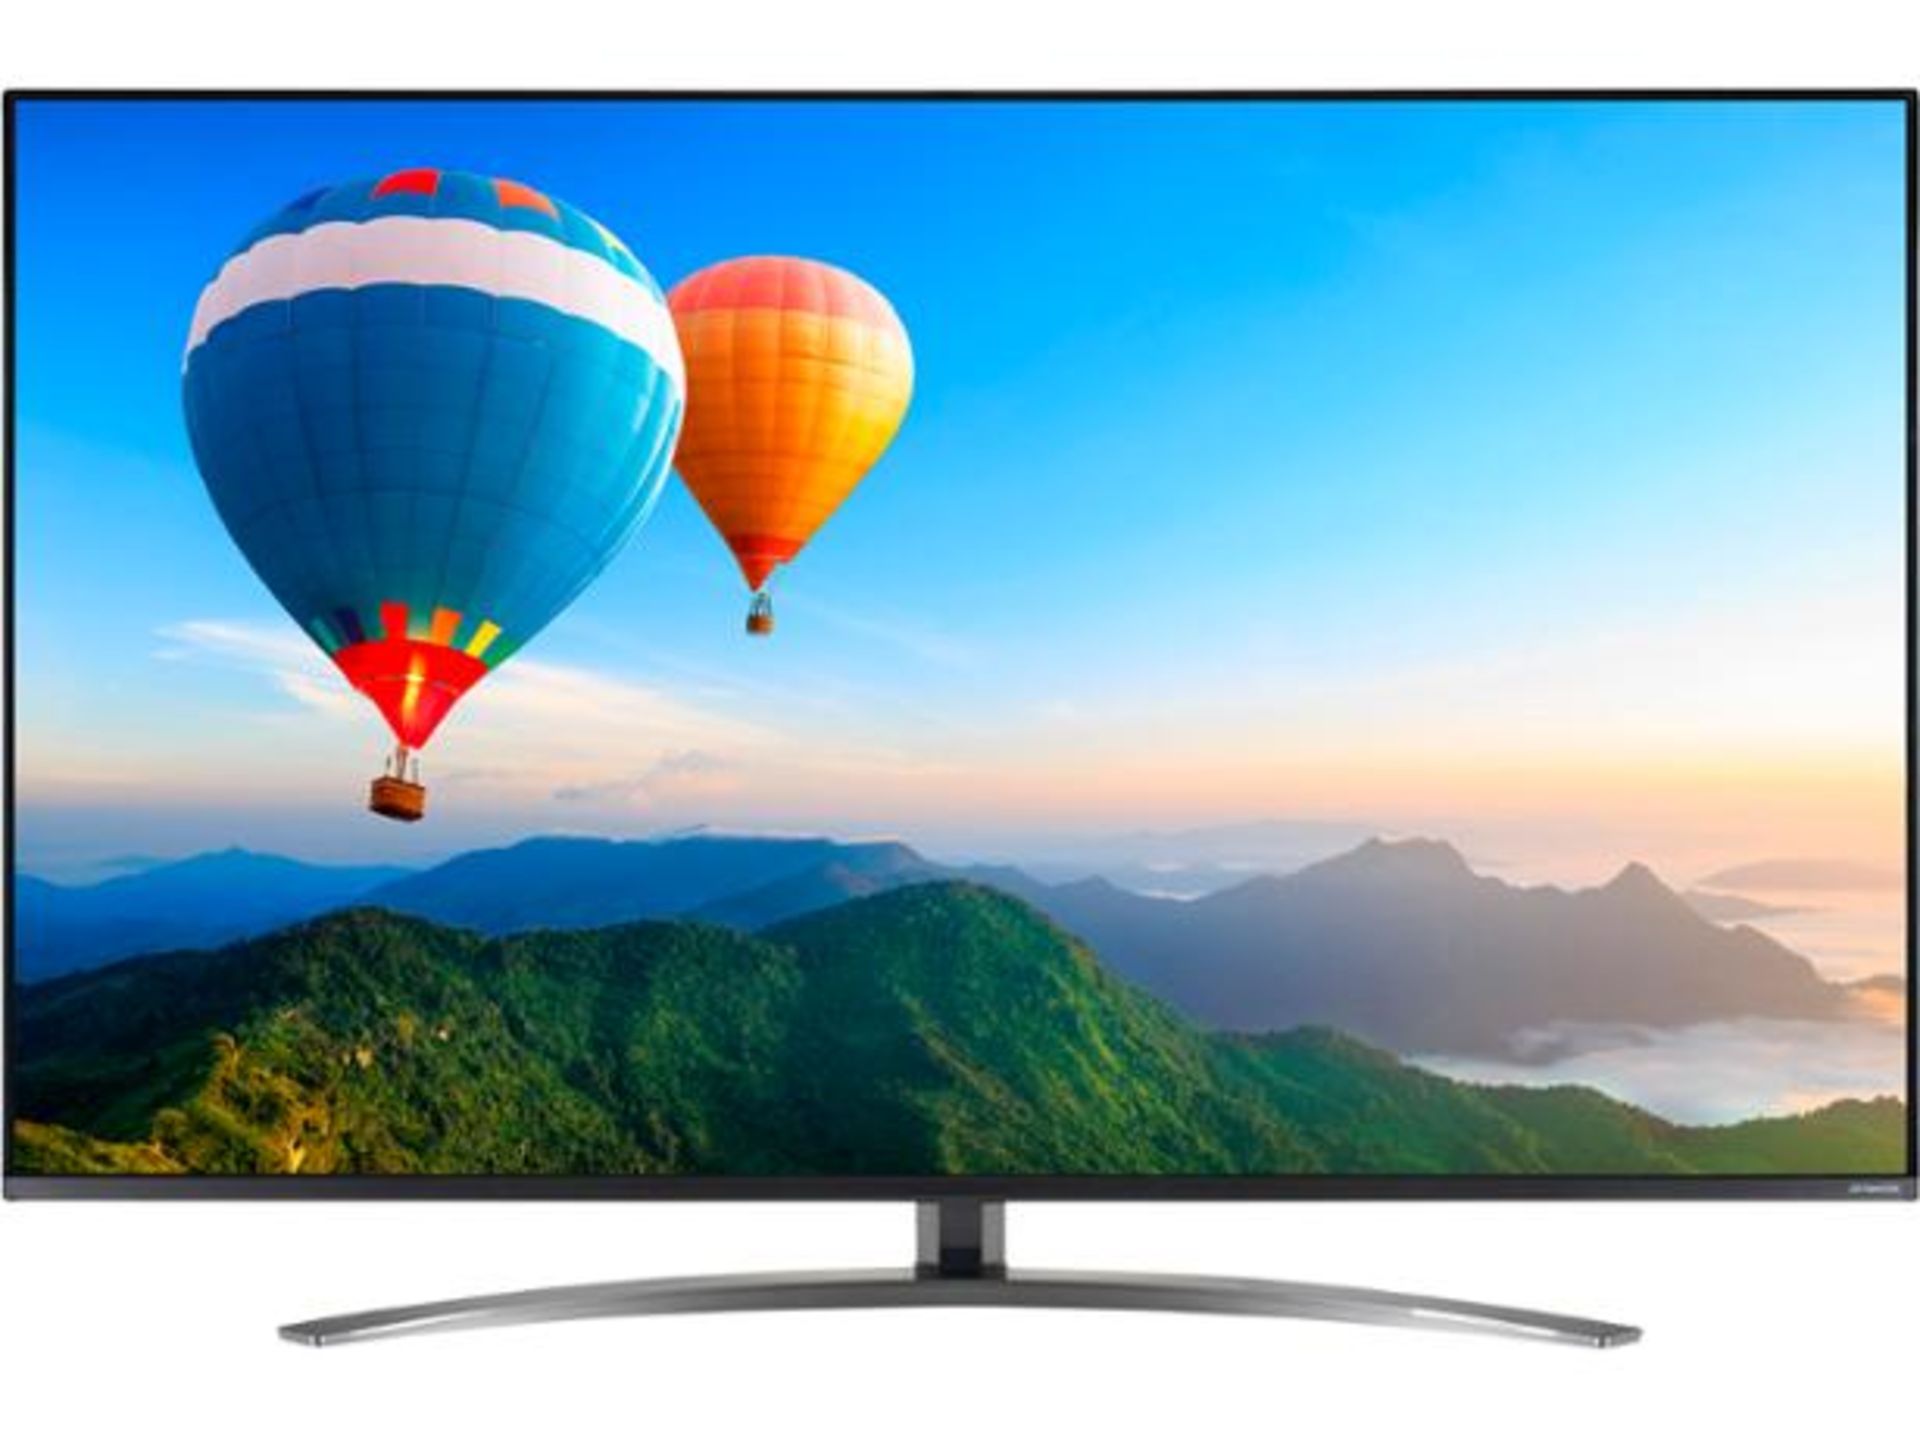 V Brand New LG 55 Inch ACTIVE HDR 4K SUPER ULTRA HD NANO LED SMART TV WITH FREEVIEW HD & WEBOS &